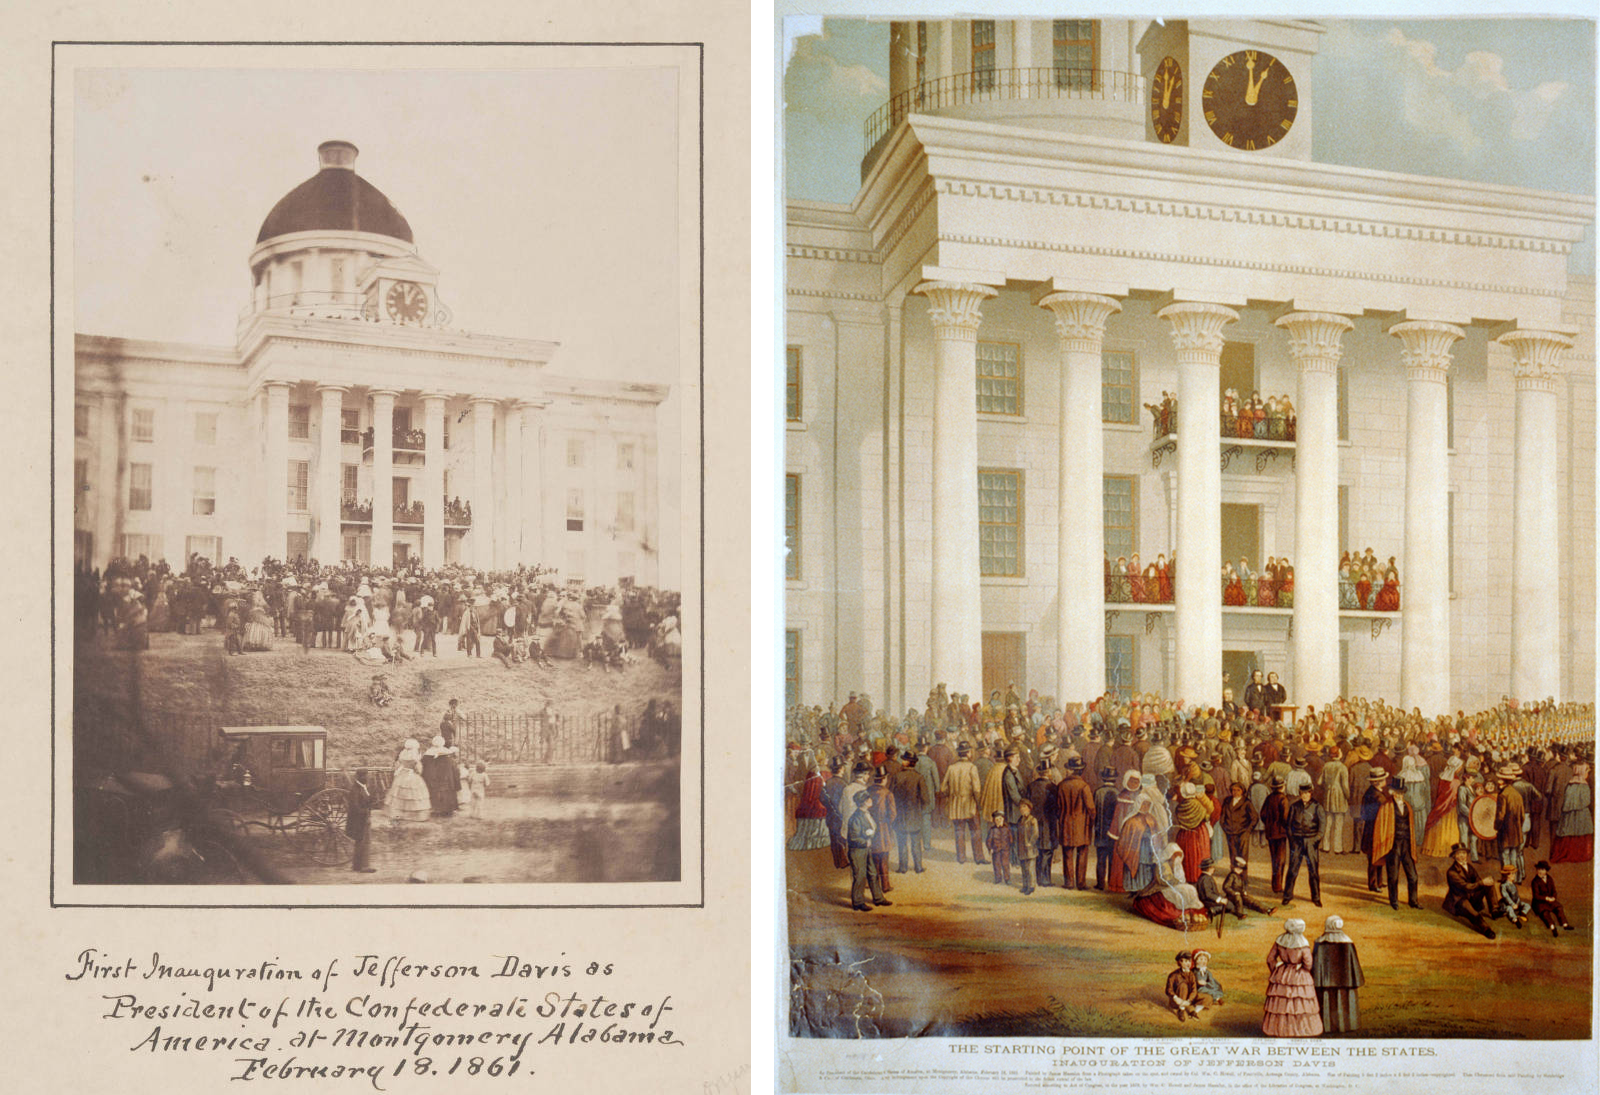 Left: A. C. McIntyre, First inauguration of Jefferson Davis as President of the Confederate States of America at Montgomery, Alabama, February 18, 1861 (photographic print, 19.9 x 14.7 cm (Boston Athenaeum); right: The starting point of the great war between the states: the inauguration of Jefferson Davis, 1878, chromolithograph, 76.6 x 60.8 cm (Library of Congress))